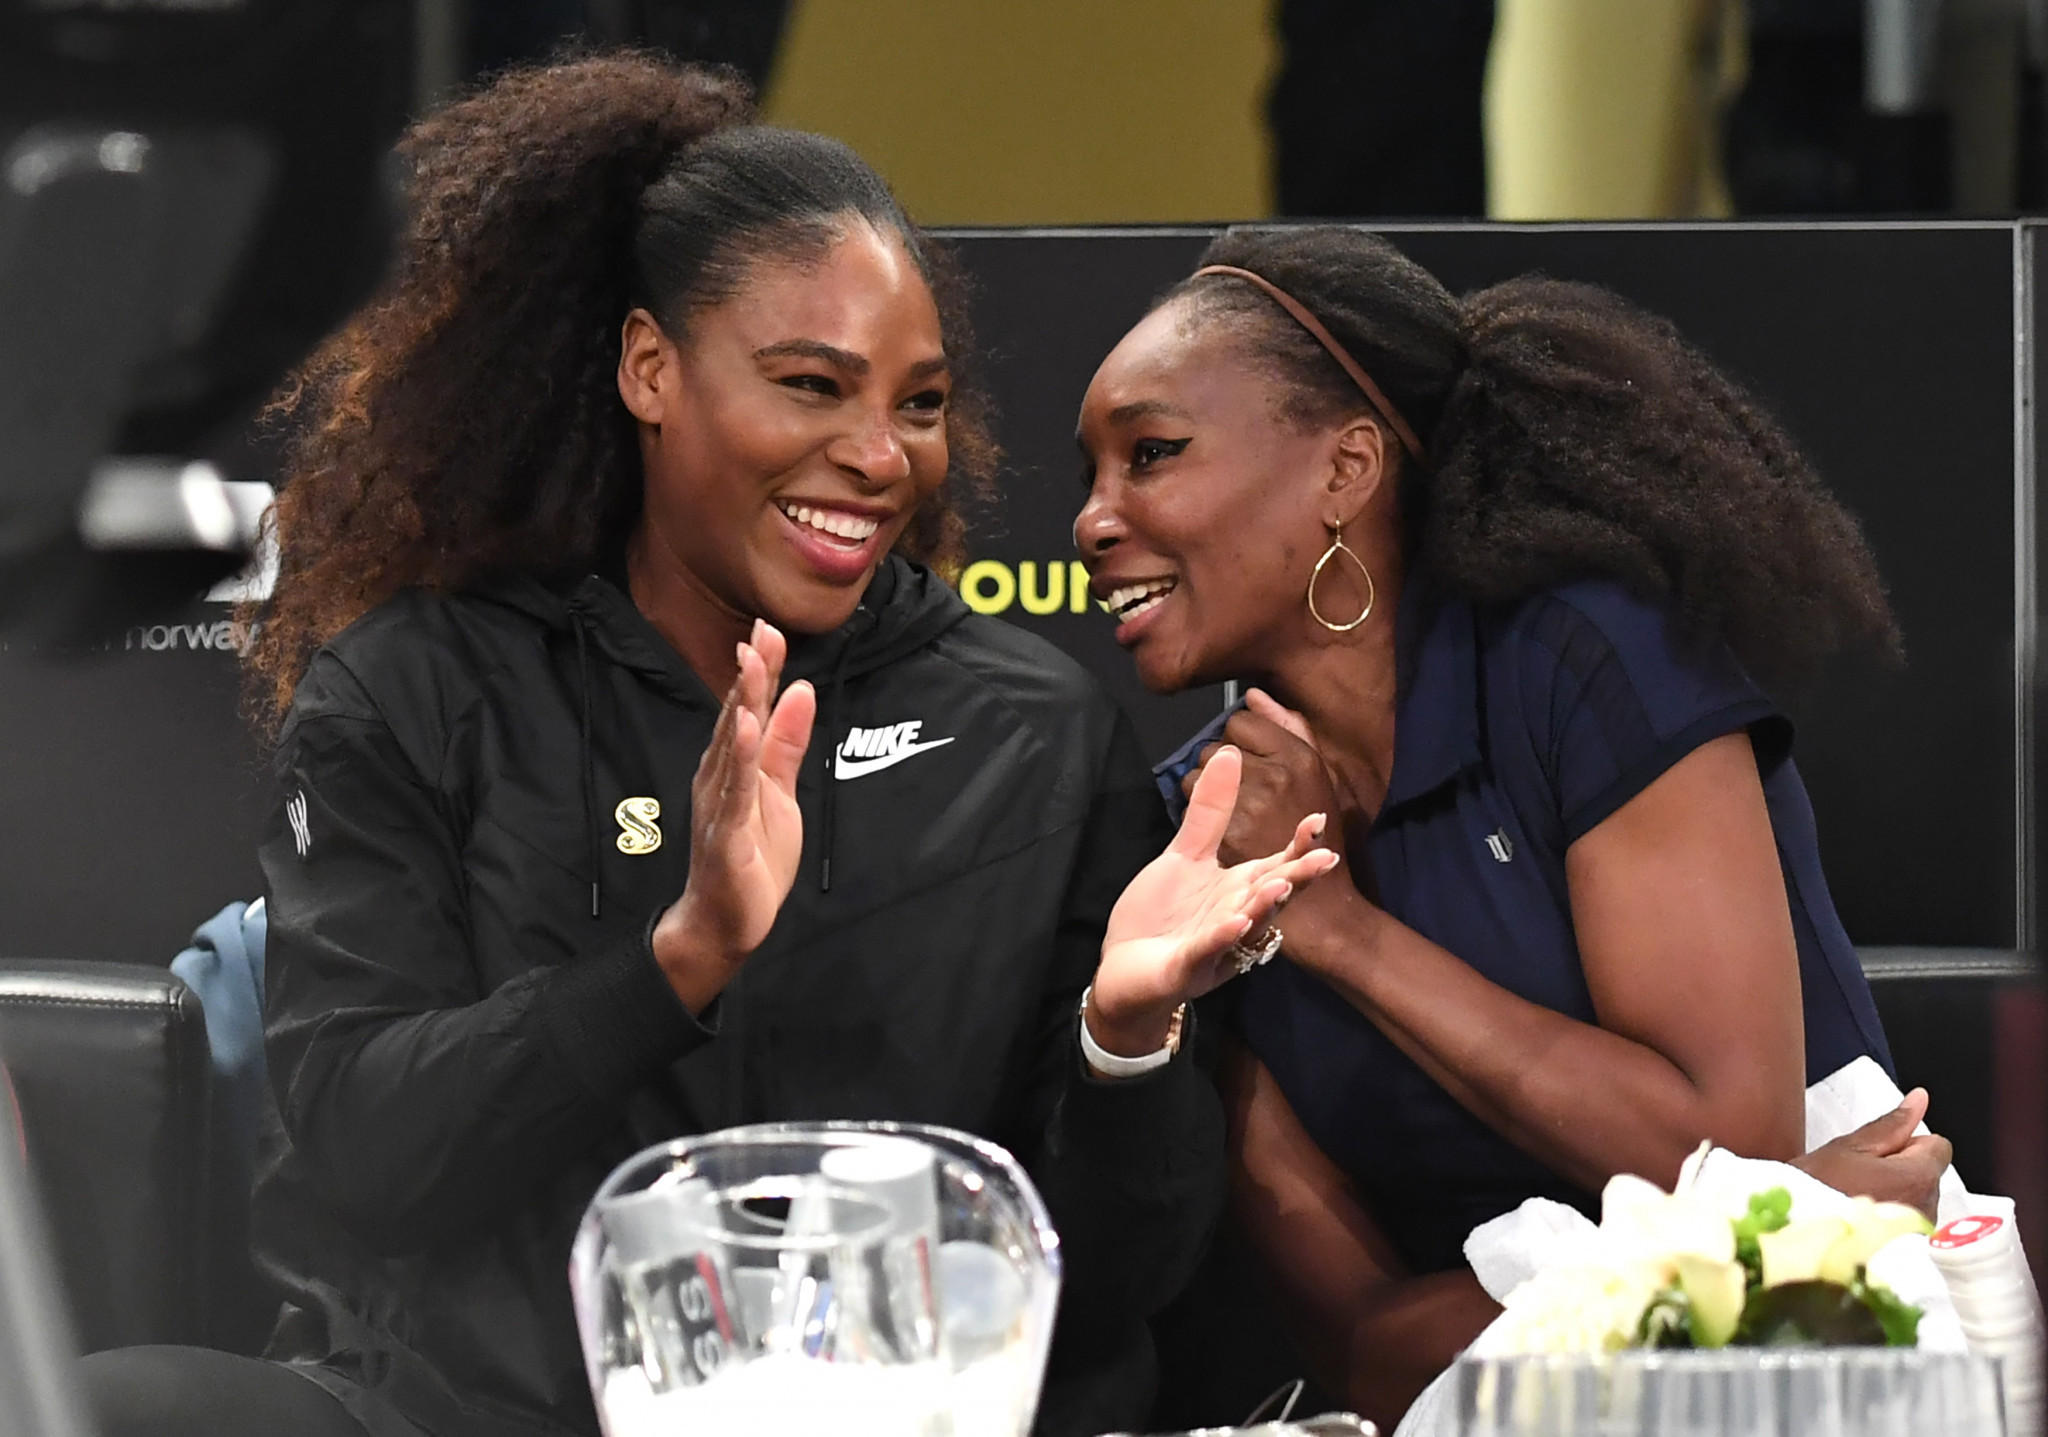 Williams sisters to face each other in Indian Wells Masters third round